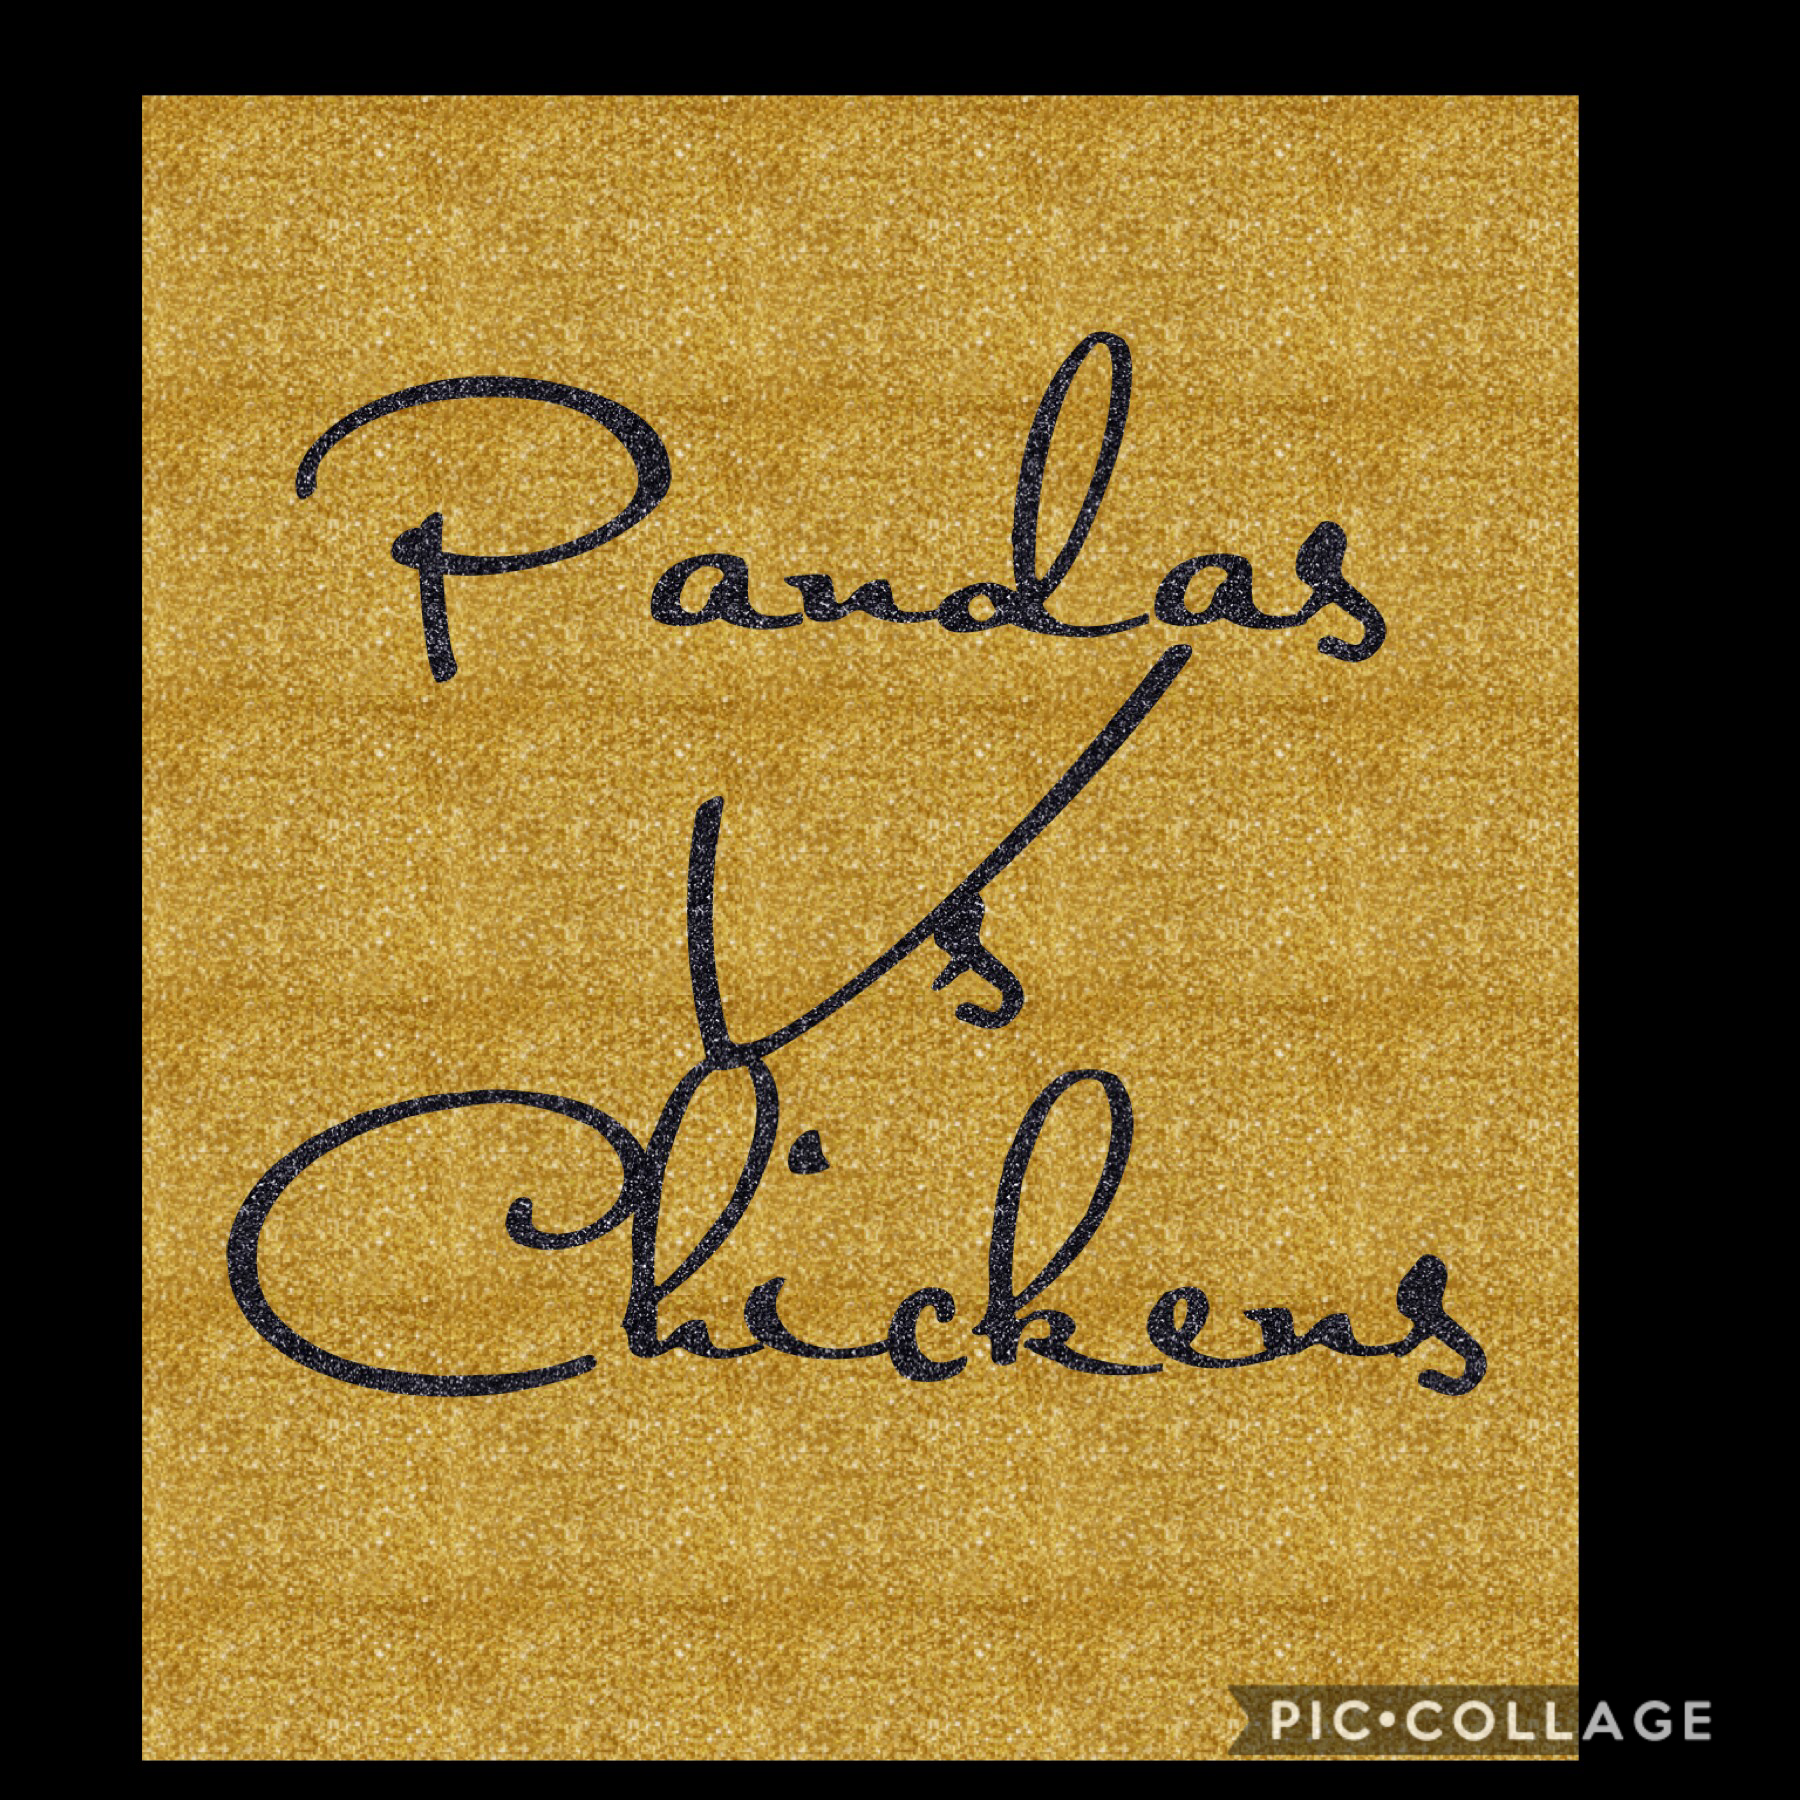 Pandas are better than chickens